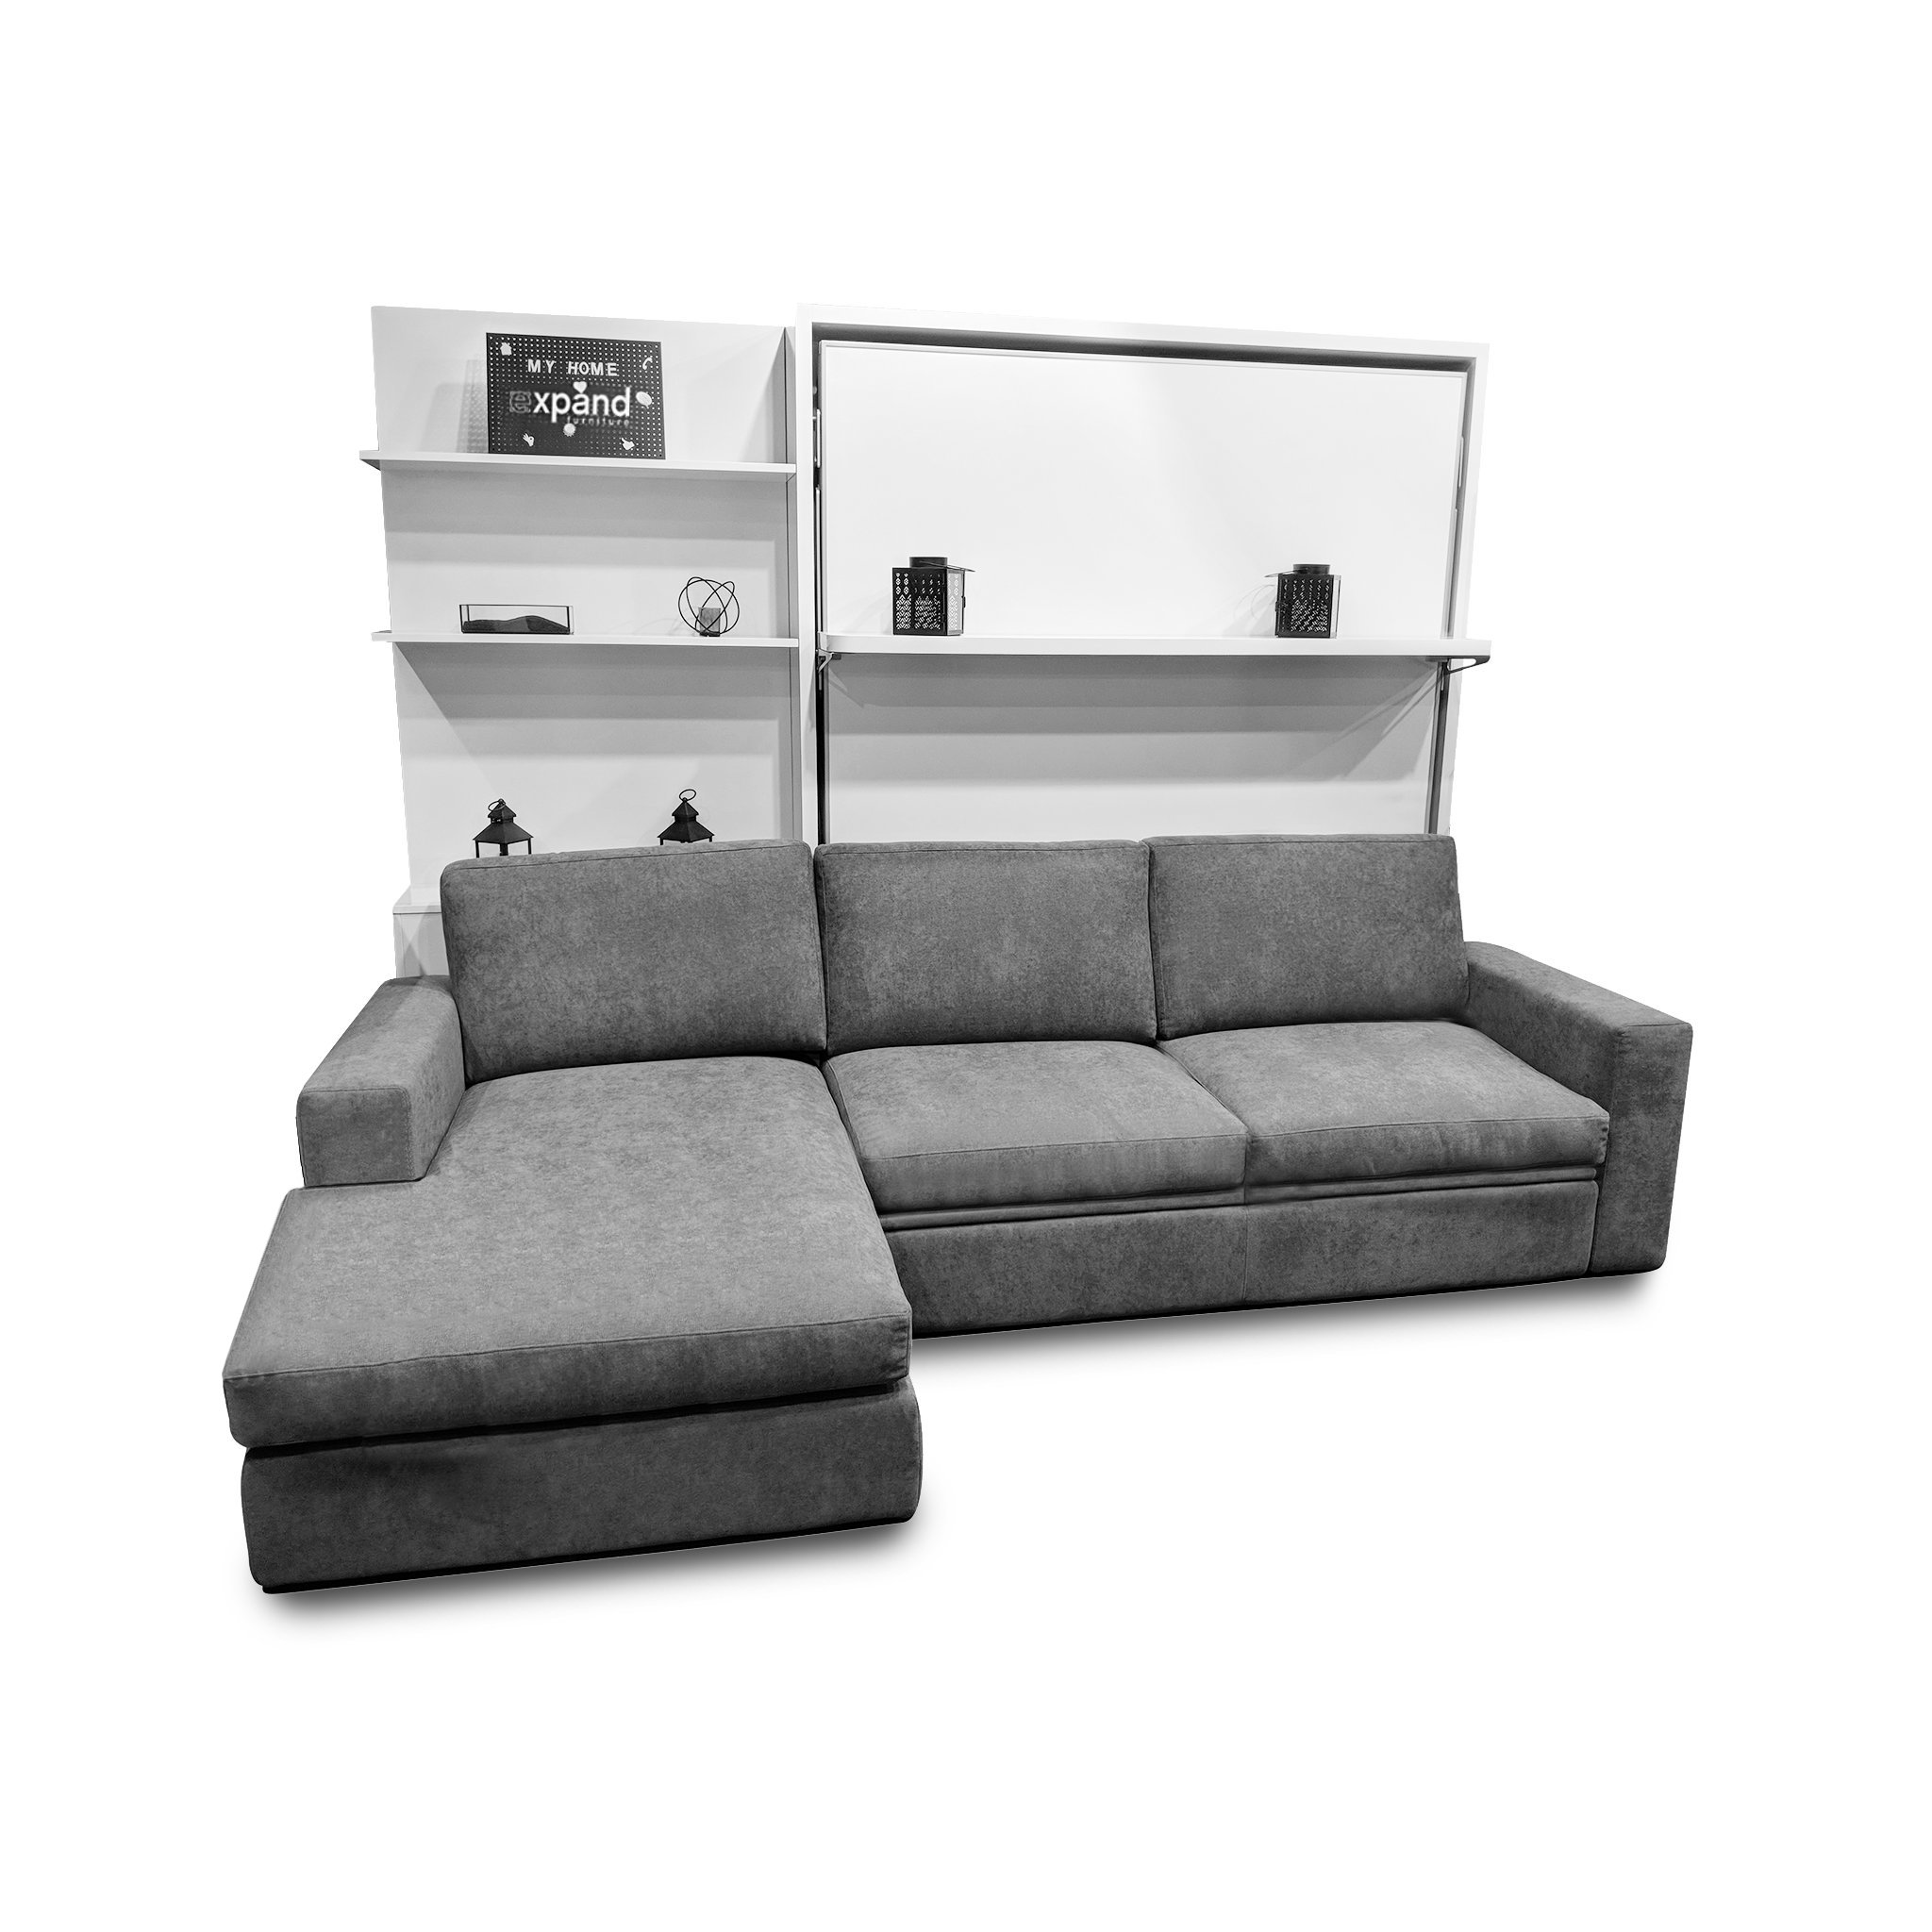 Compatto – Freestanding Wall Bed Sofa - Expand Furniture - Folding